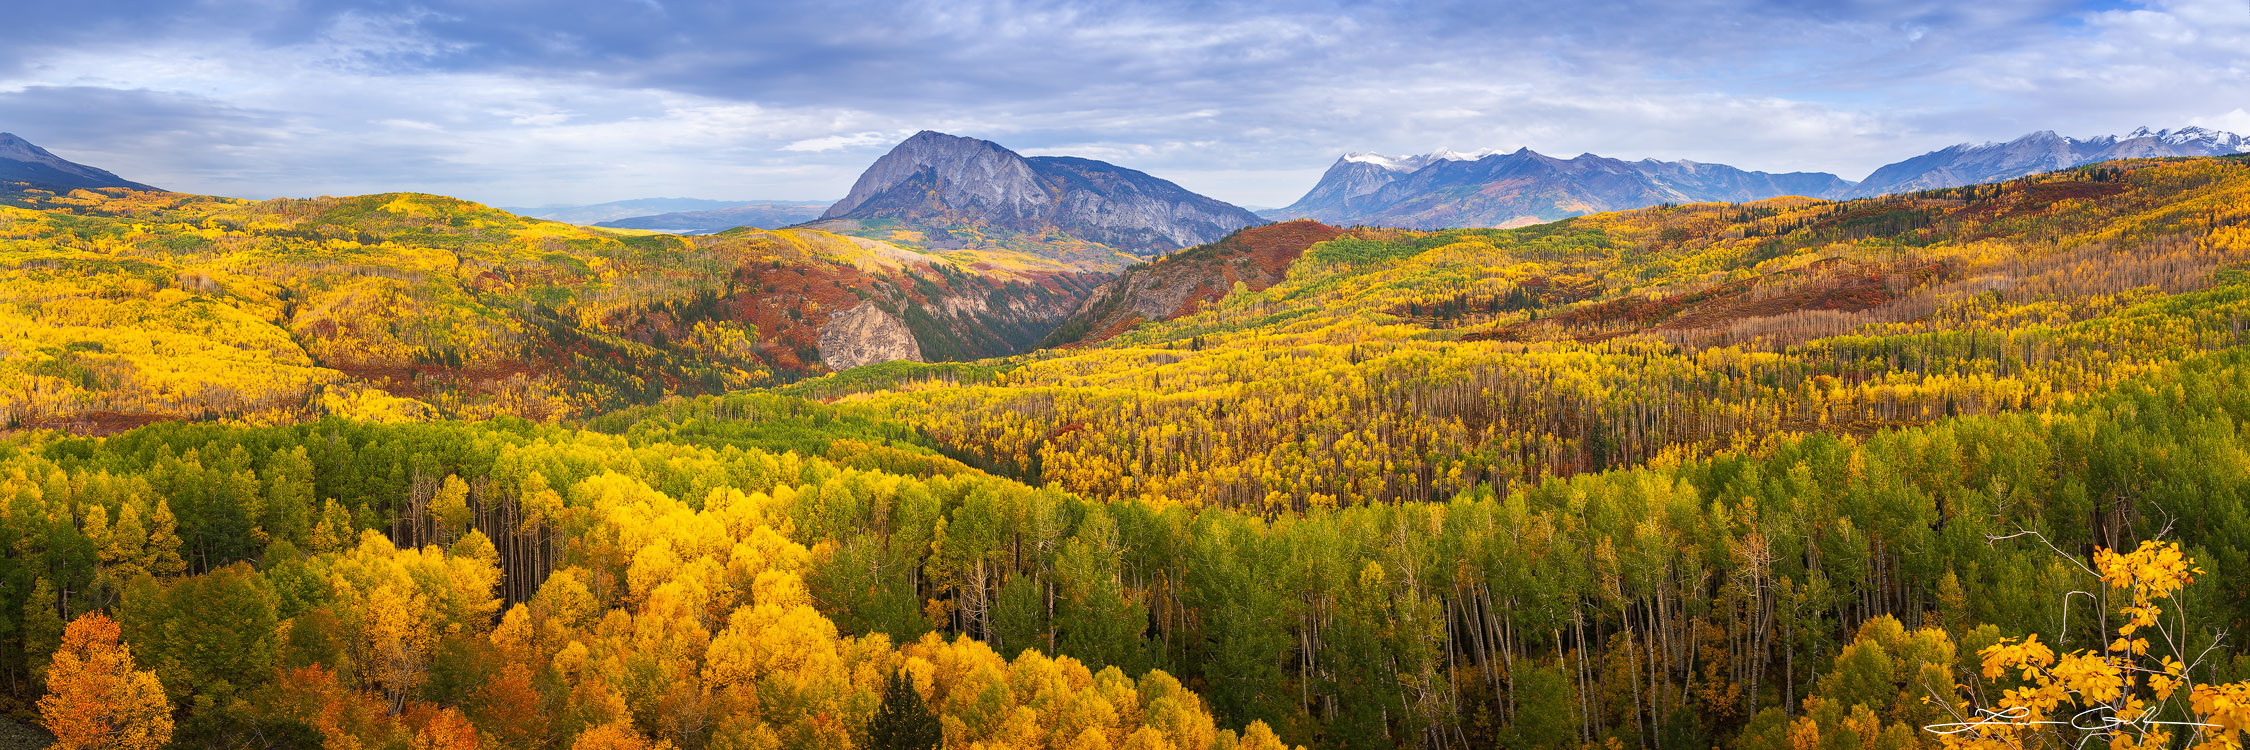 A large aspen tree valley with beautiful autumn colored leaves and mountains in the background - Gintchin Fine Art